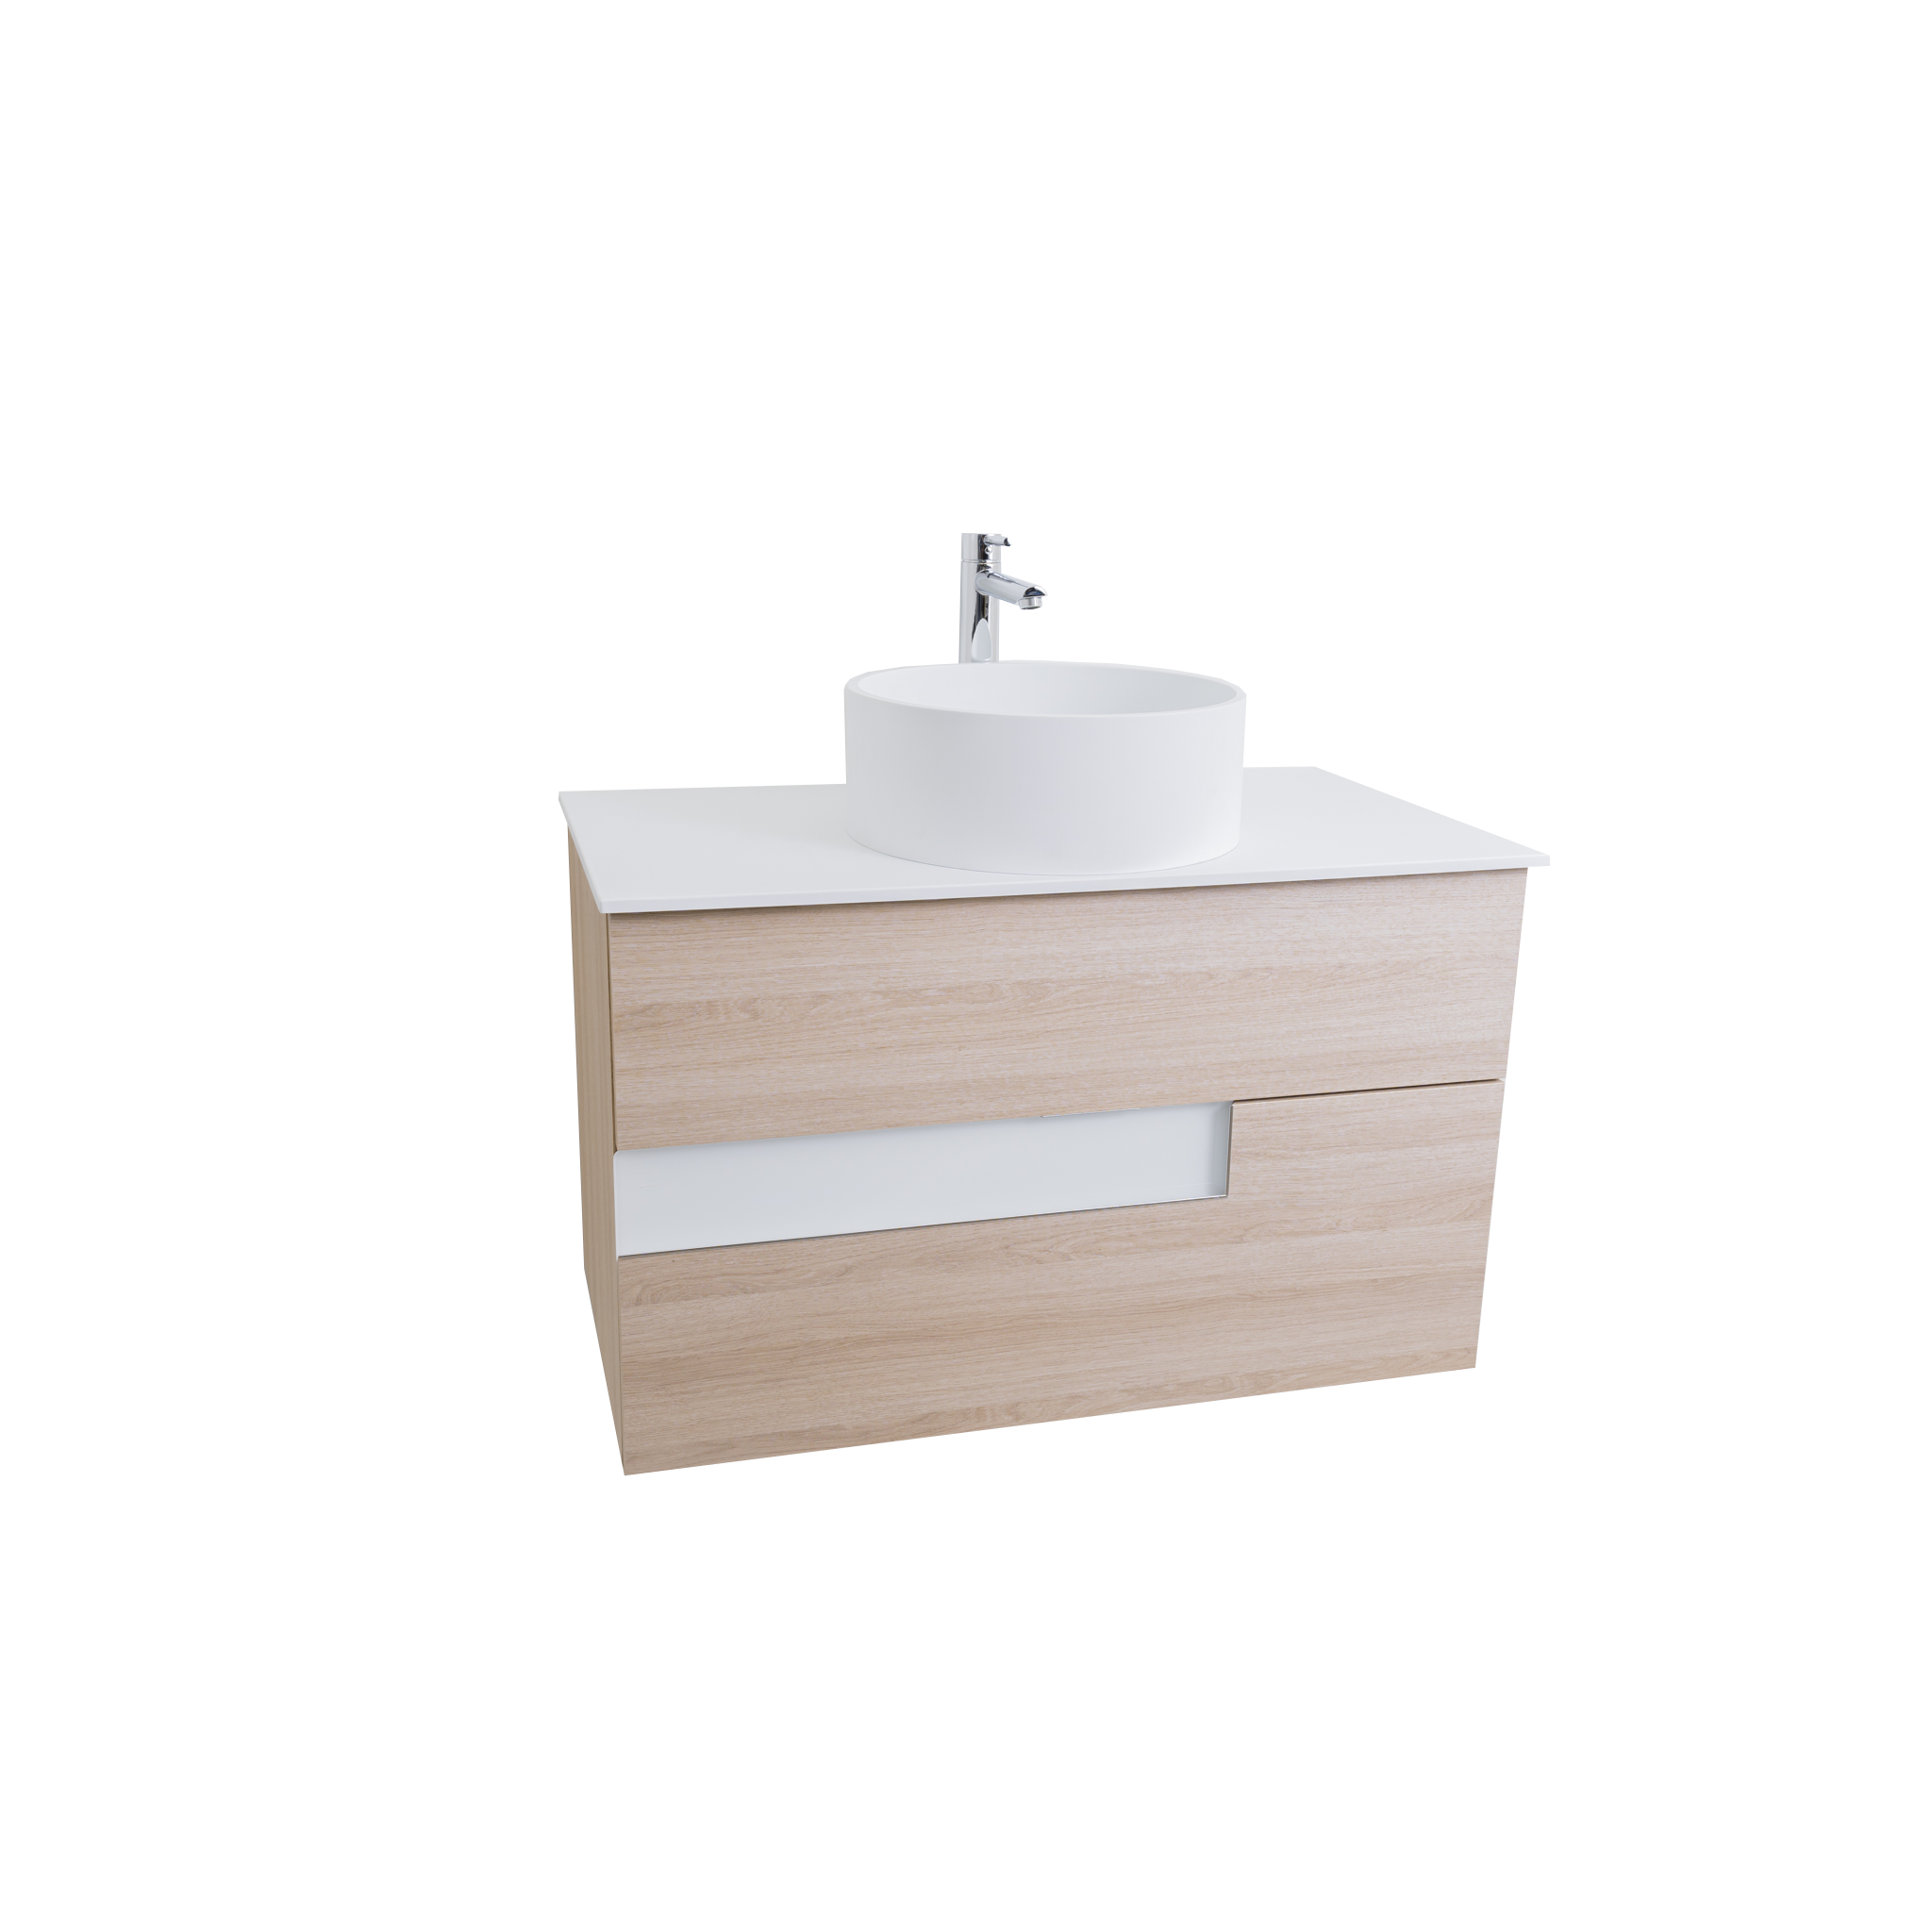 Vision 39.5 Natural Light Wood Cabinet, Solid Surface Flat White Counter And Round Solid Surface White Basin 1386, Wall Mounted Modern Vanity Set